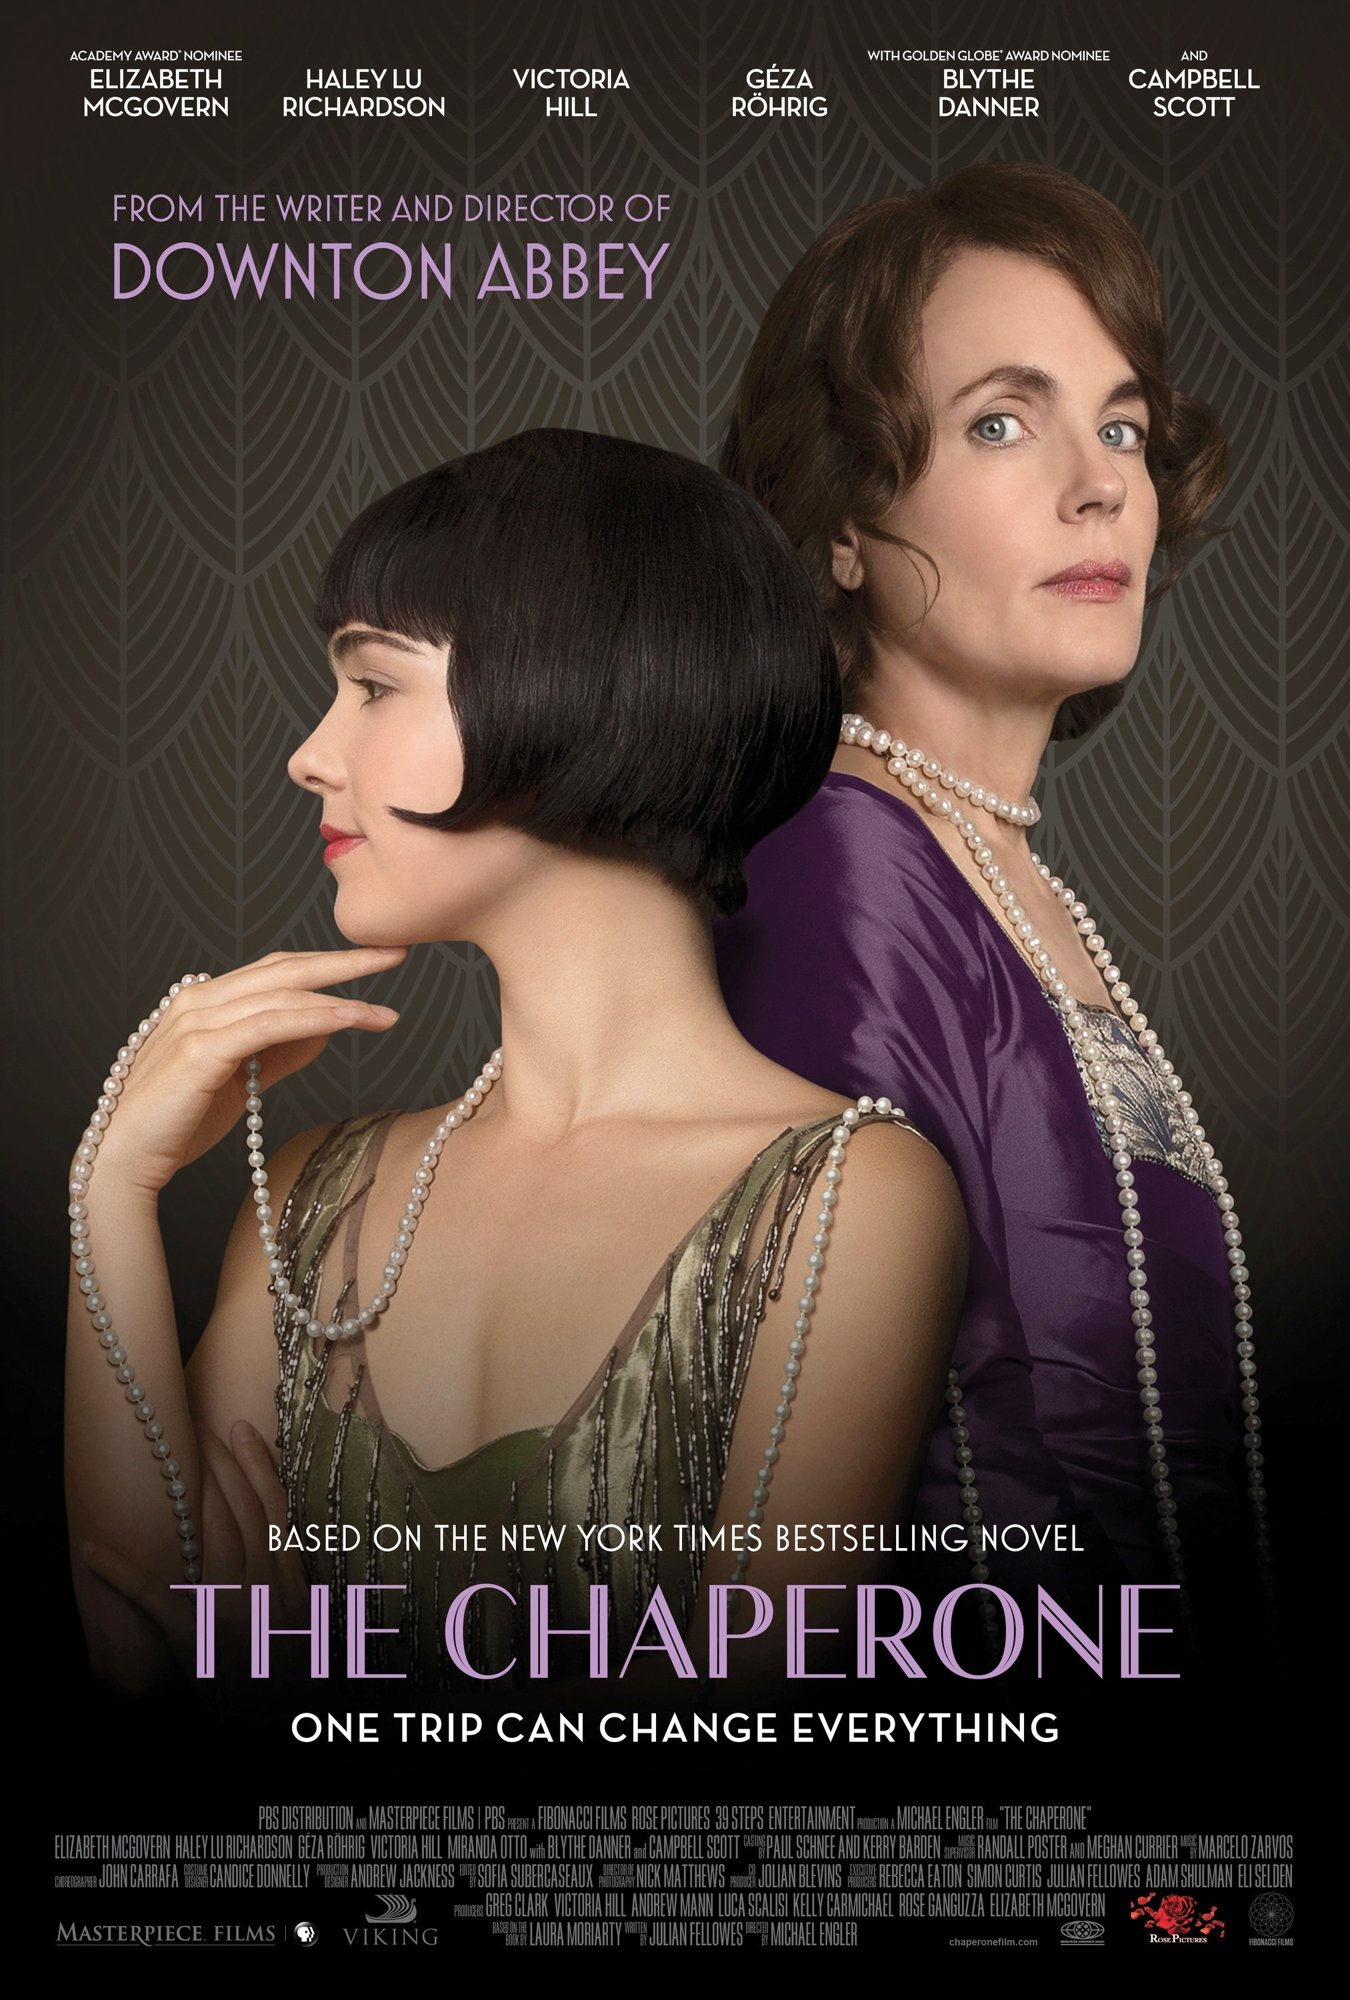 louise brooks pbs the chaperone